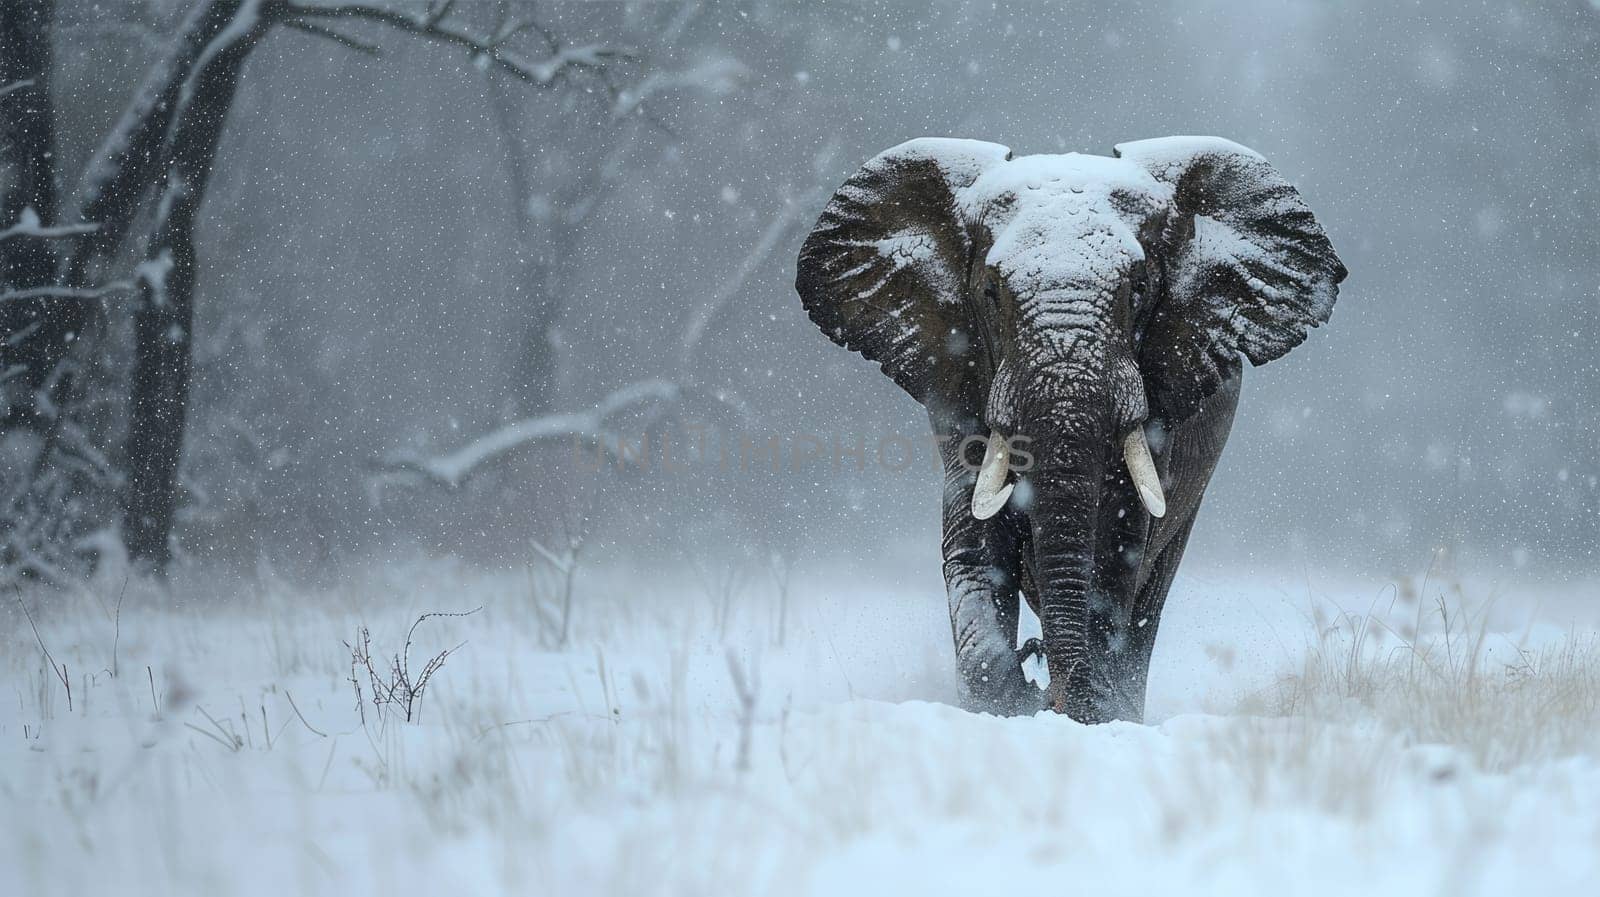 An elephant lost in a snowstorm. An unusual environment for an elephant. by natali_brill